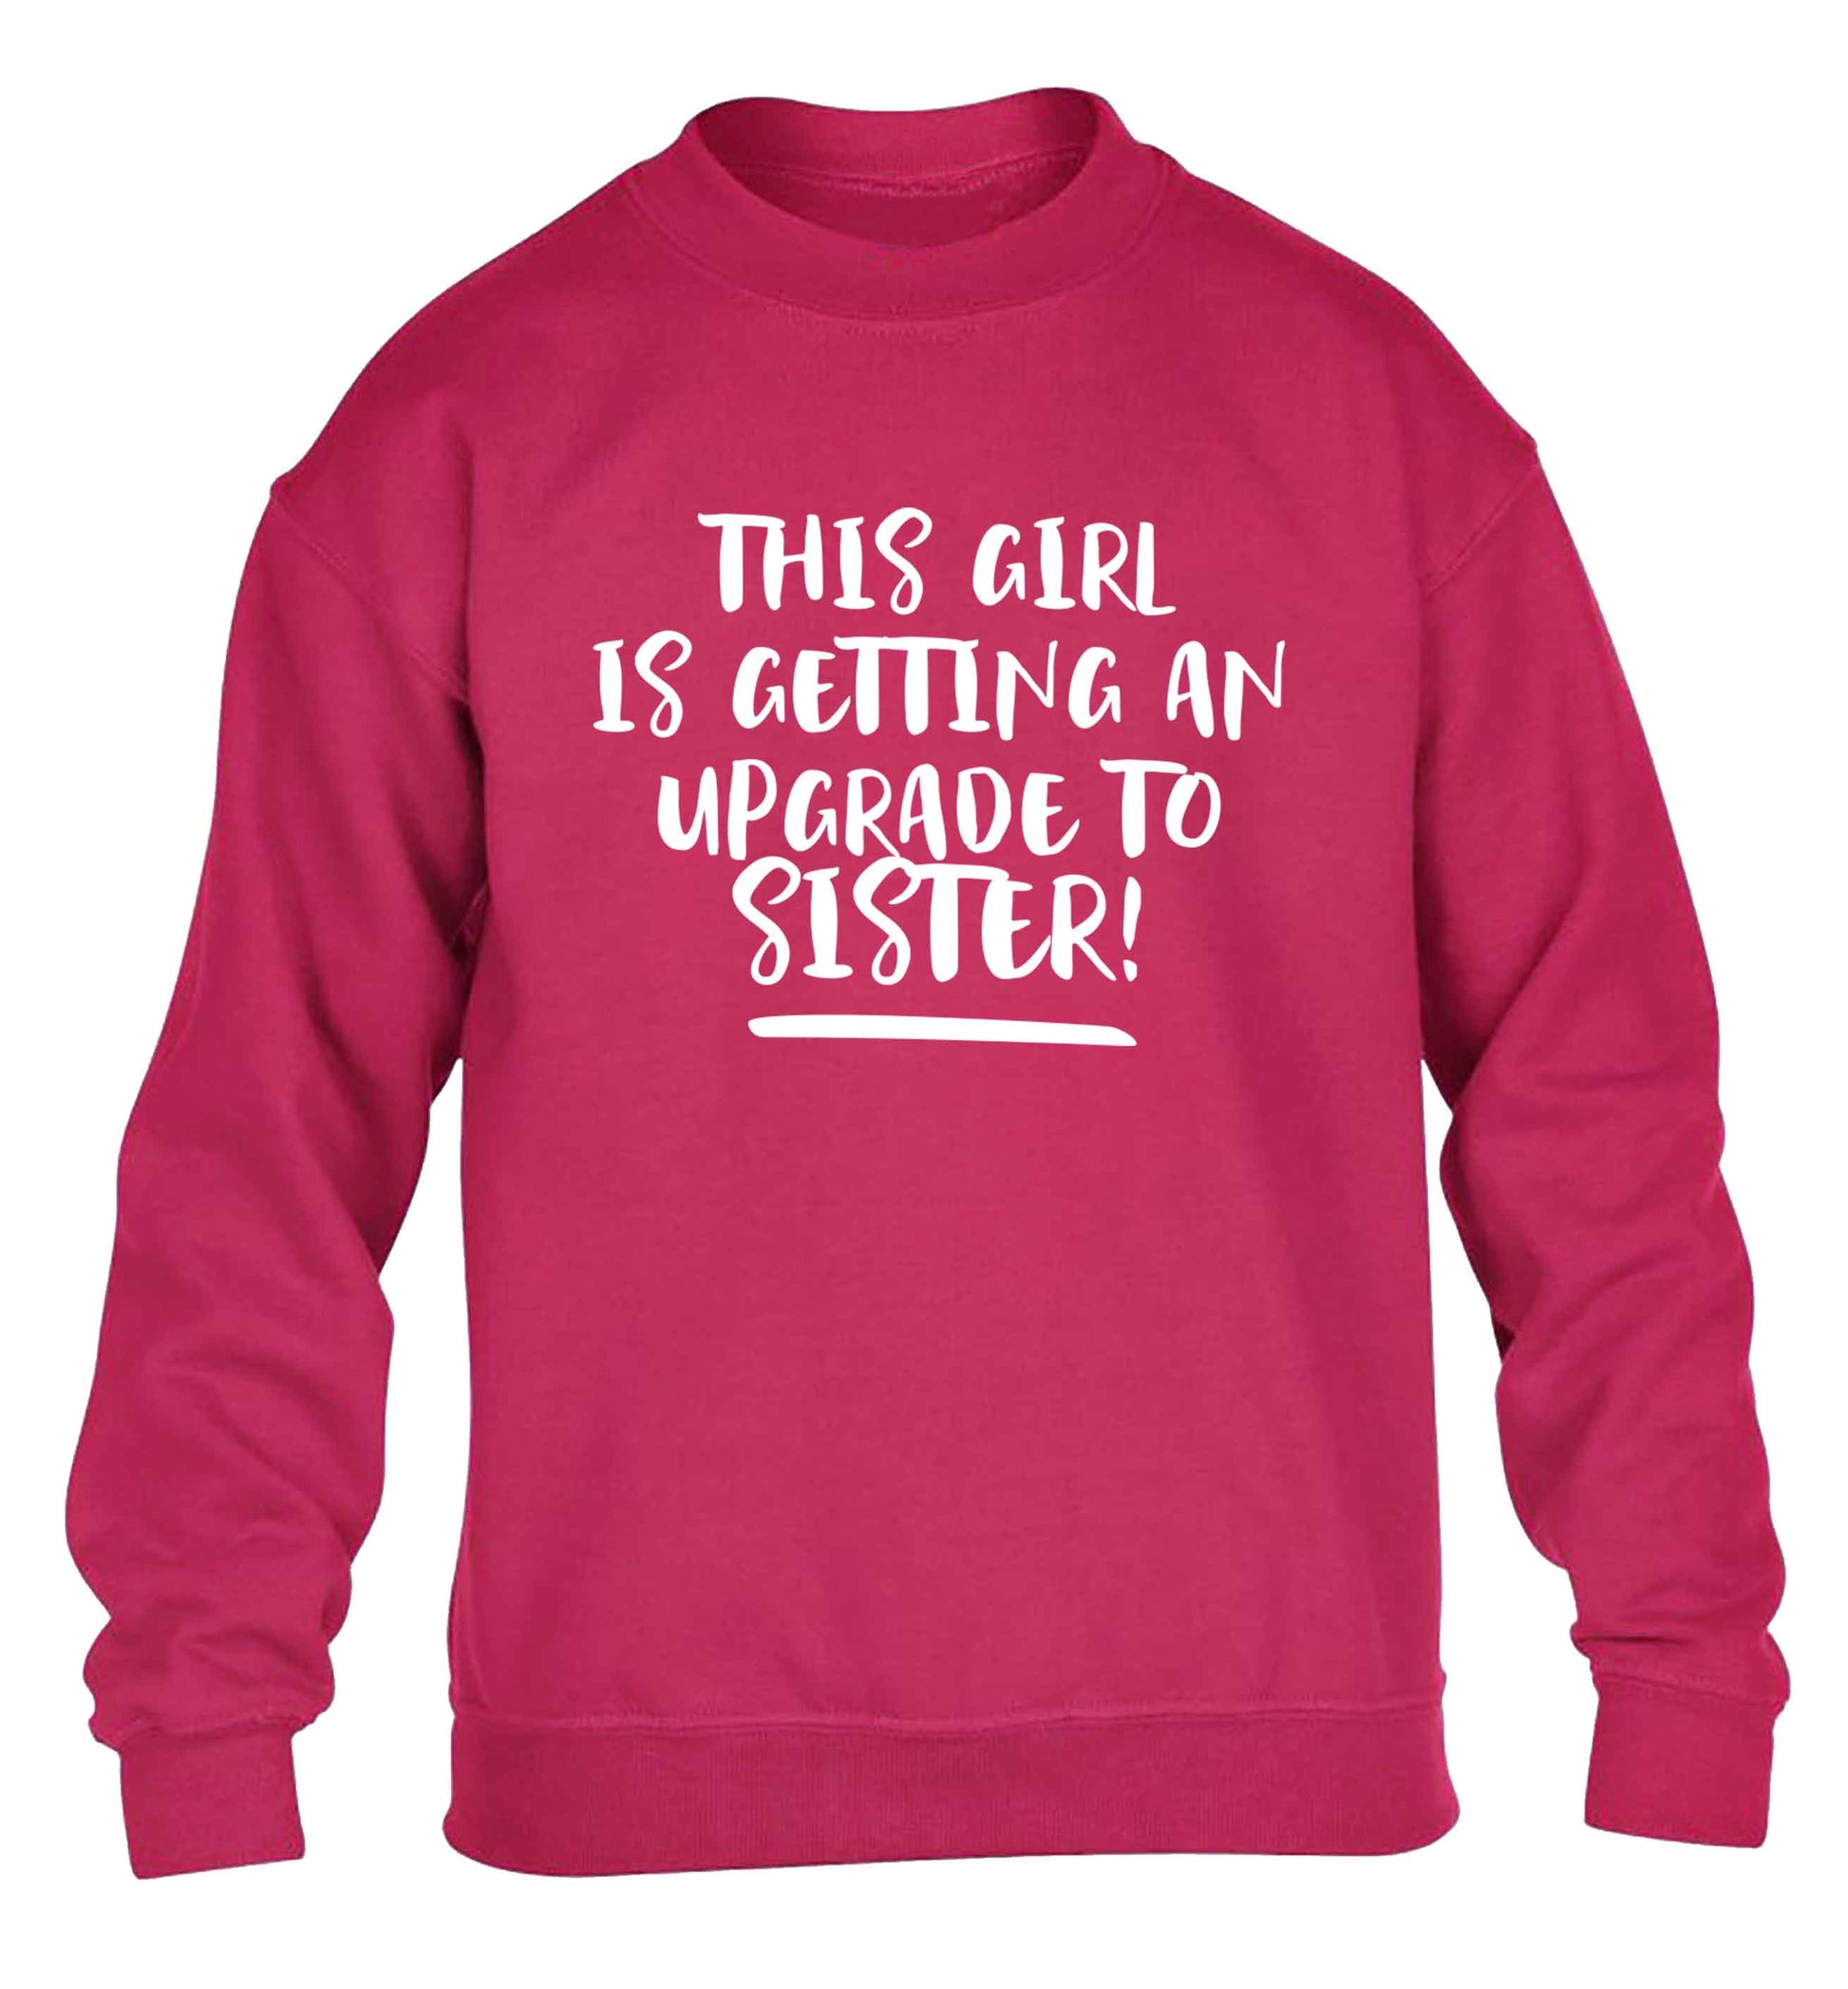 This girl is getting an upgrade to sister! children's pink sweater 12-13 Years